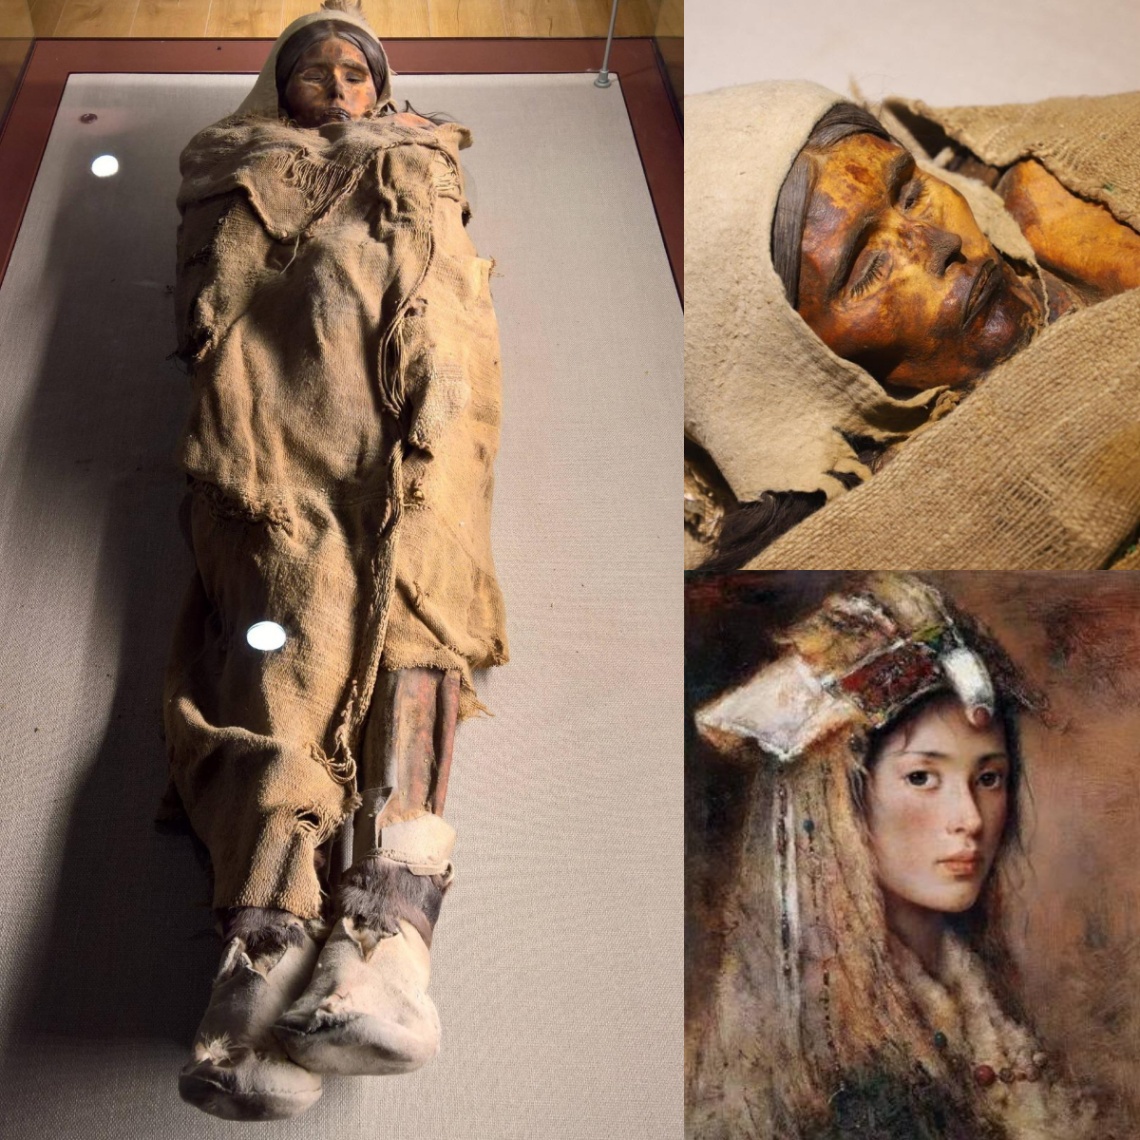 The Timeless Elegance: Unveiling the 4,000-Year-Old Mummy from Lourlan